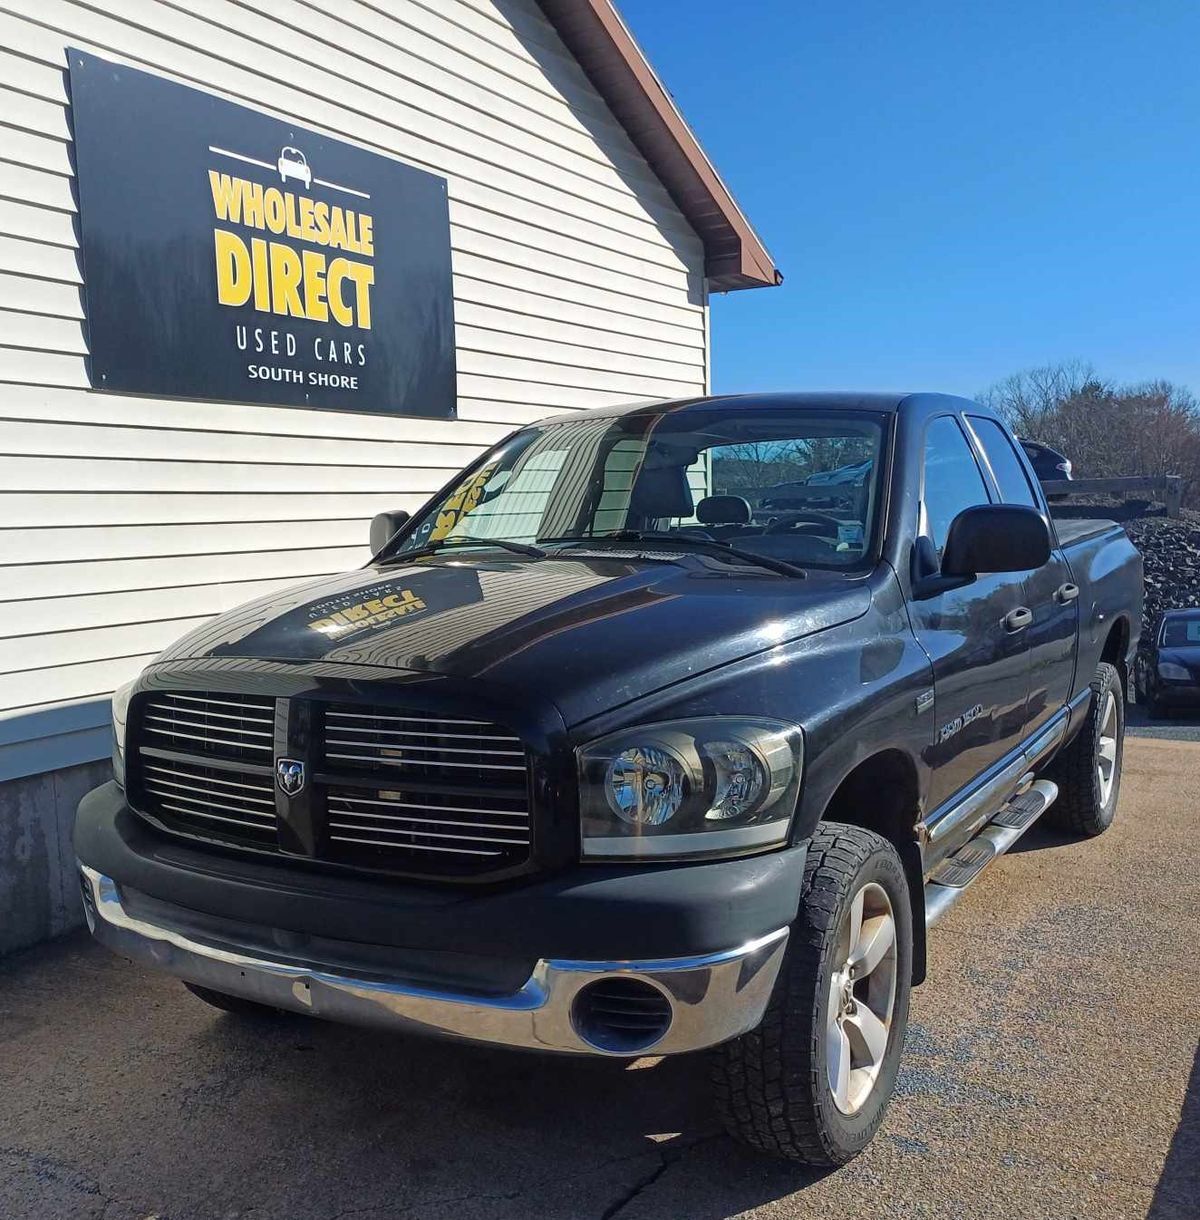 2007 Dodge Ram 4x4 Auto V8 with Hitch, Air, Cruise, More!